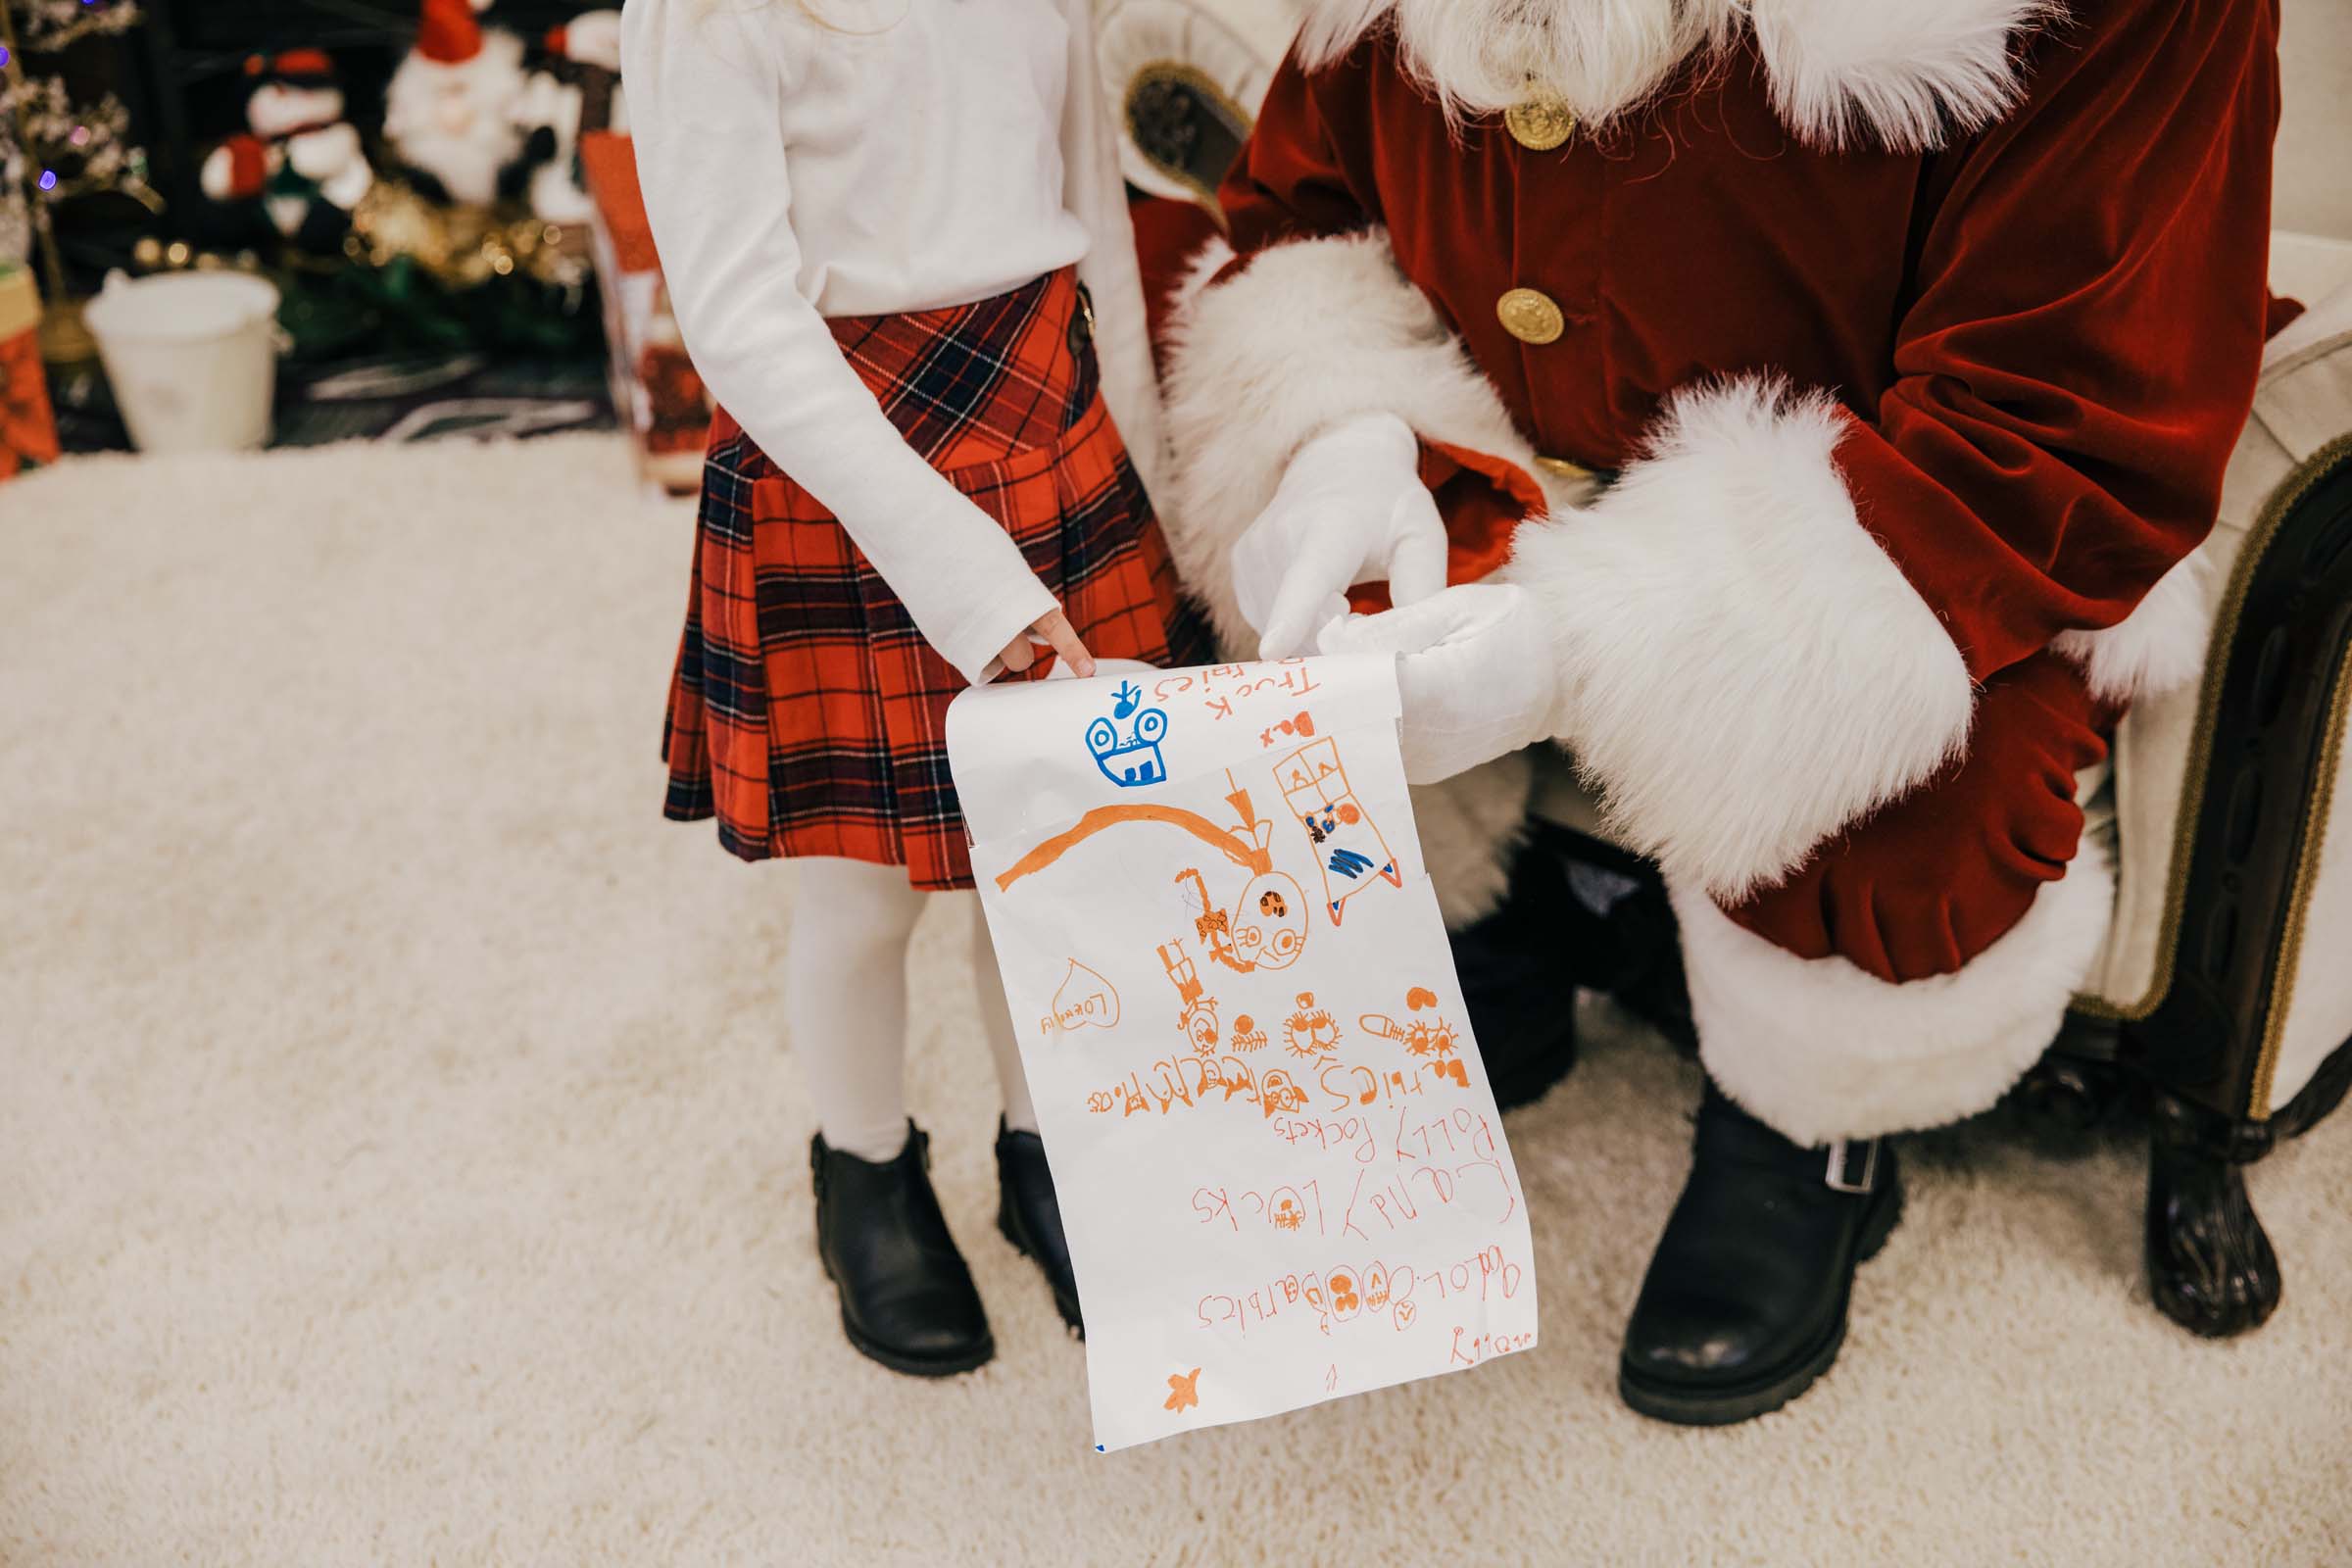 Little girl showing Santa her list that she drew with colored markers